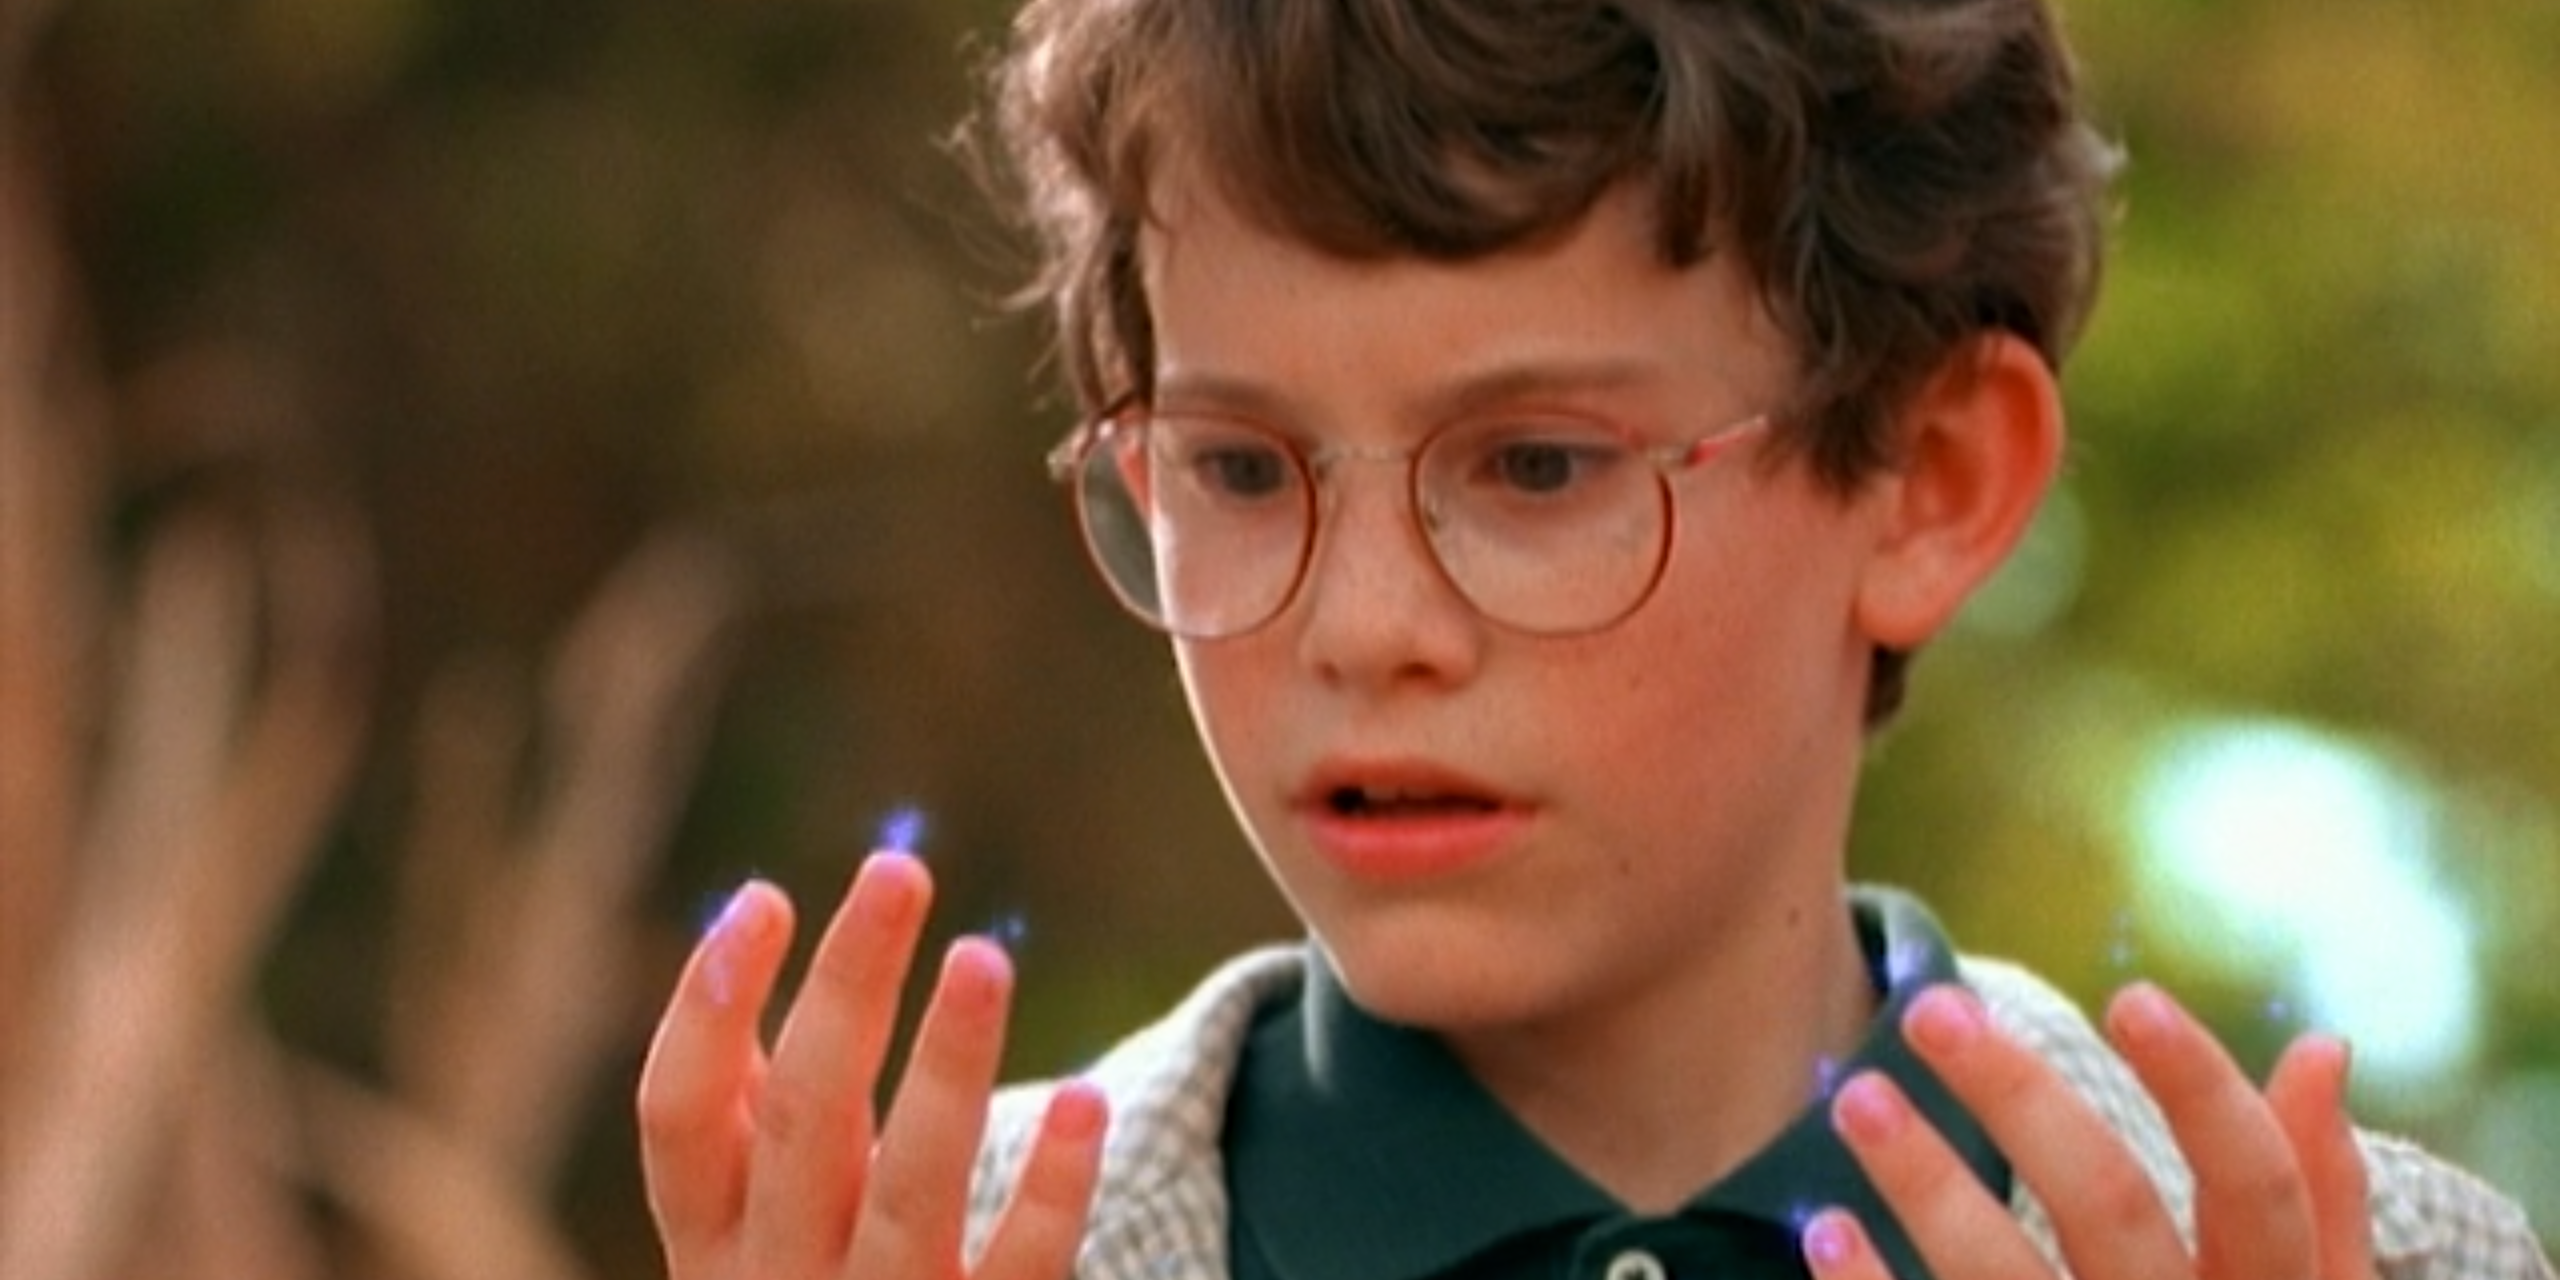 Dylan staring as sparks come from his fingers in Halloweentown